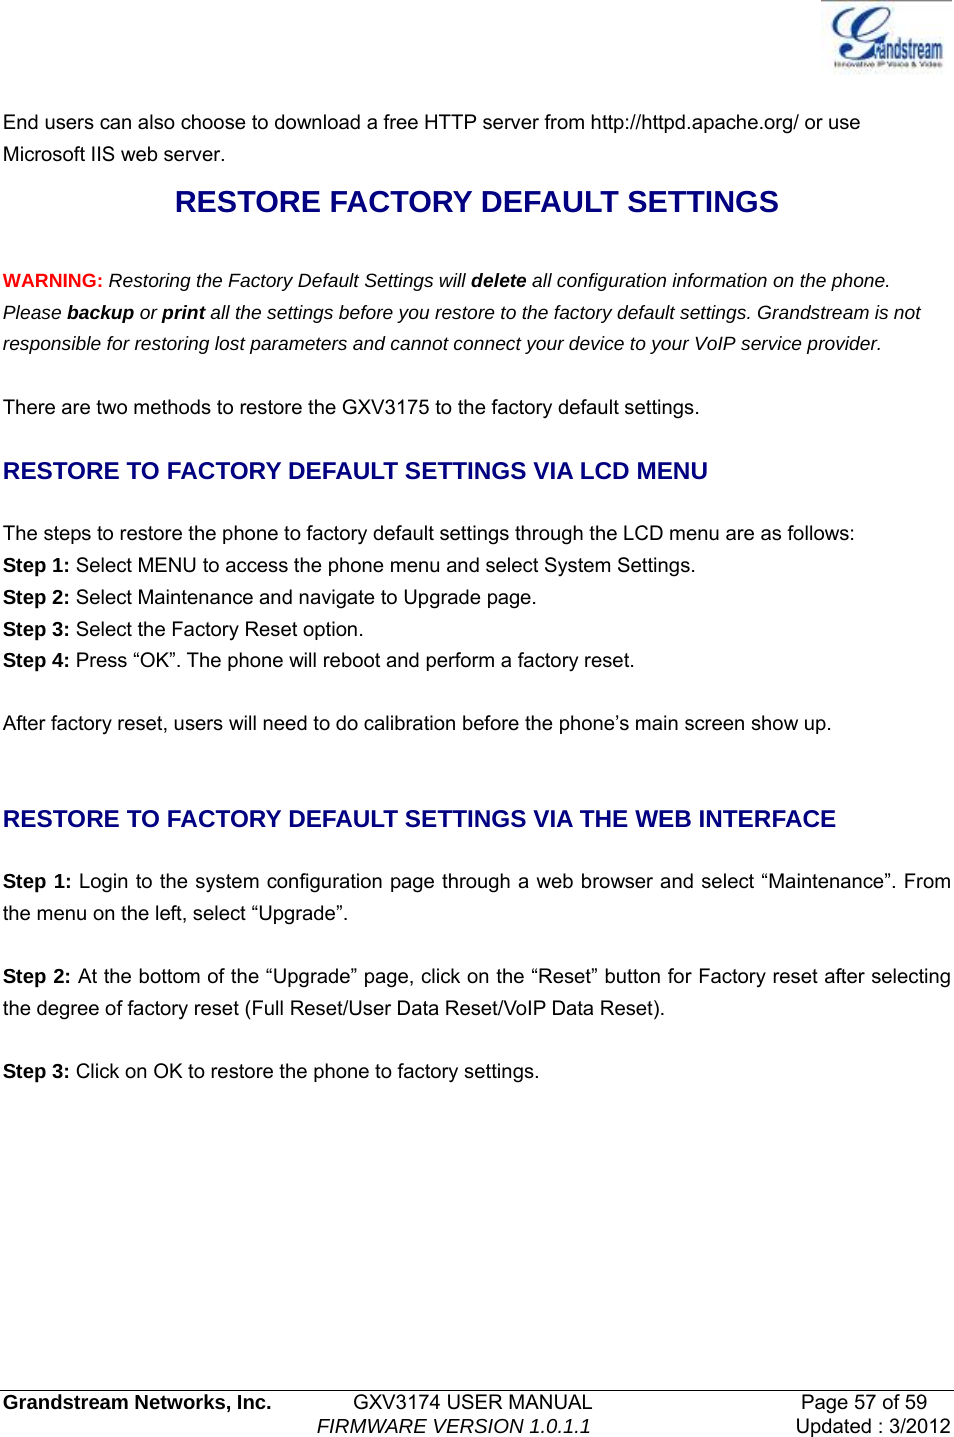   Grandstream Networks, Inc.        GXV3174 USER MANUAL                     Page 57 of 59                                FIRMWARE VERSION 1.0.1.1  Updated : 3/2012   End users can also choose to download a free HTTP server from http://httpd.apache.org/ or use Microsoft IIS web server. RESTORE FACTORY DEFAULT SETTINGS  WARNING: Restoring the Factory Default Settings will delete all configuration information on the phone. Please backup or print all the settings before you restore to the factory default settings. Grandstream is not responsible for restoring lost parameters and cannot connect your device to your VoIP service provider.  There are two methods to restore the GXV3175 to the factory default settings.  RESTORE TO FACTORY DEFAULT SETTINGS VIA LCD MENU  The steps to restore the phone to factory default settings through the LCD menu are as follows: Step 1: Select MENU to access the phone menu and select System Settings.   Step 2: Select Maintenance and navigate to Upgrade page. Step 3: Select the Factory Reset option.   Step 4: Press “OK”. The phone will reboot and perform a factory reset.  After factory reset, users will need to do calibration before the phone’s main screen show up.   RESTORE TO FACTORY DEFAULT SETTINGS VIA THE WEB INTERFACE    Step 1: Login to the system configuration page through a web browser and select “Maintenance”. From the menu on the left, select “Upgrade”.  Step 2: At the bottom of the “Upgrade” page, click on the “Reset” button for Factory reset after selecting the degree of factory reset (Full Reset/User Data Reset/VoIP Data Reset).    Step 3: Click on OK to restore the phone to factory settings.      